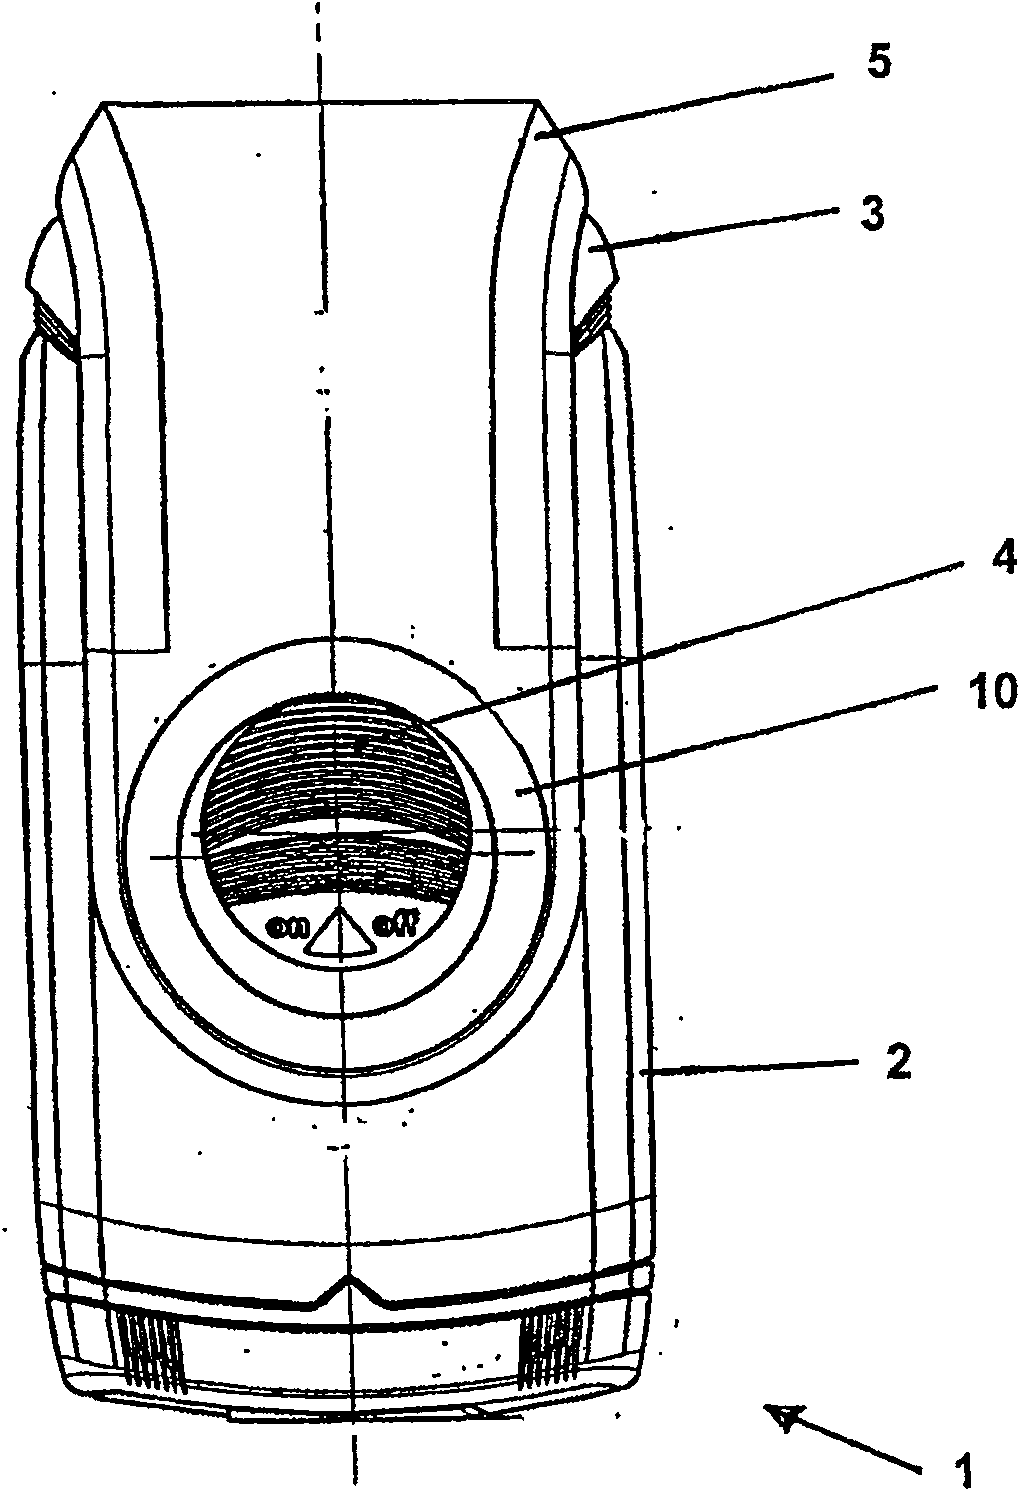 Electric hair-removing device